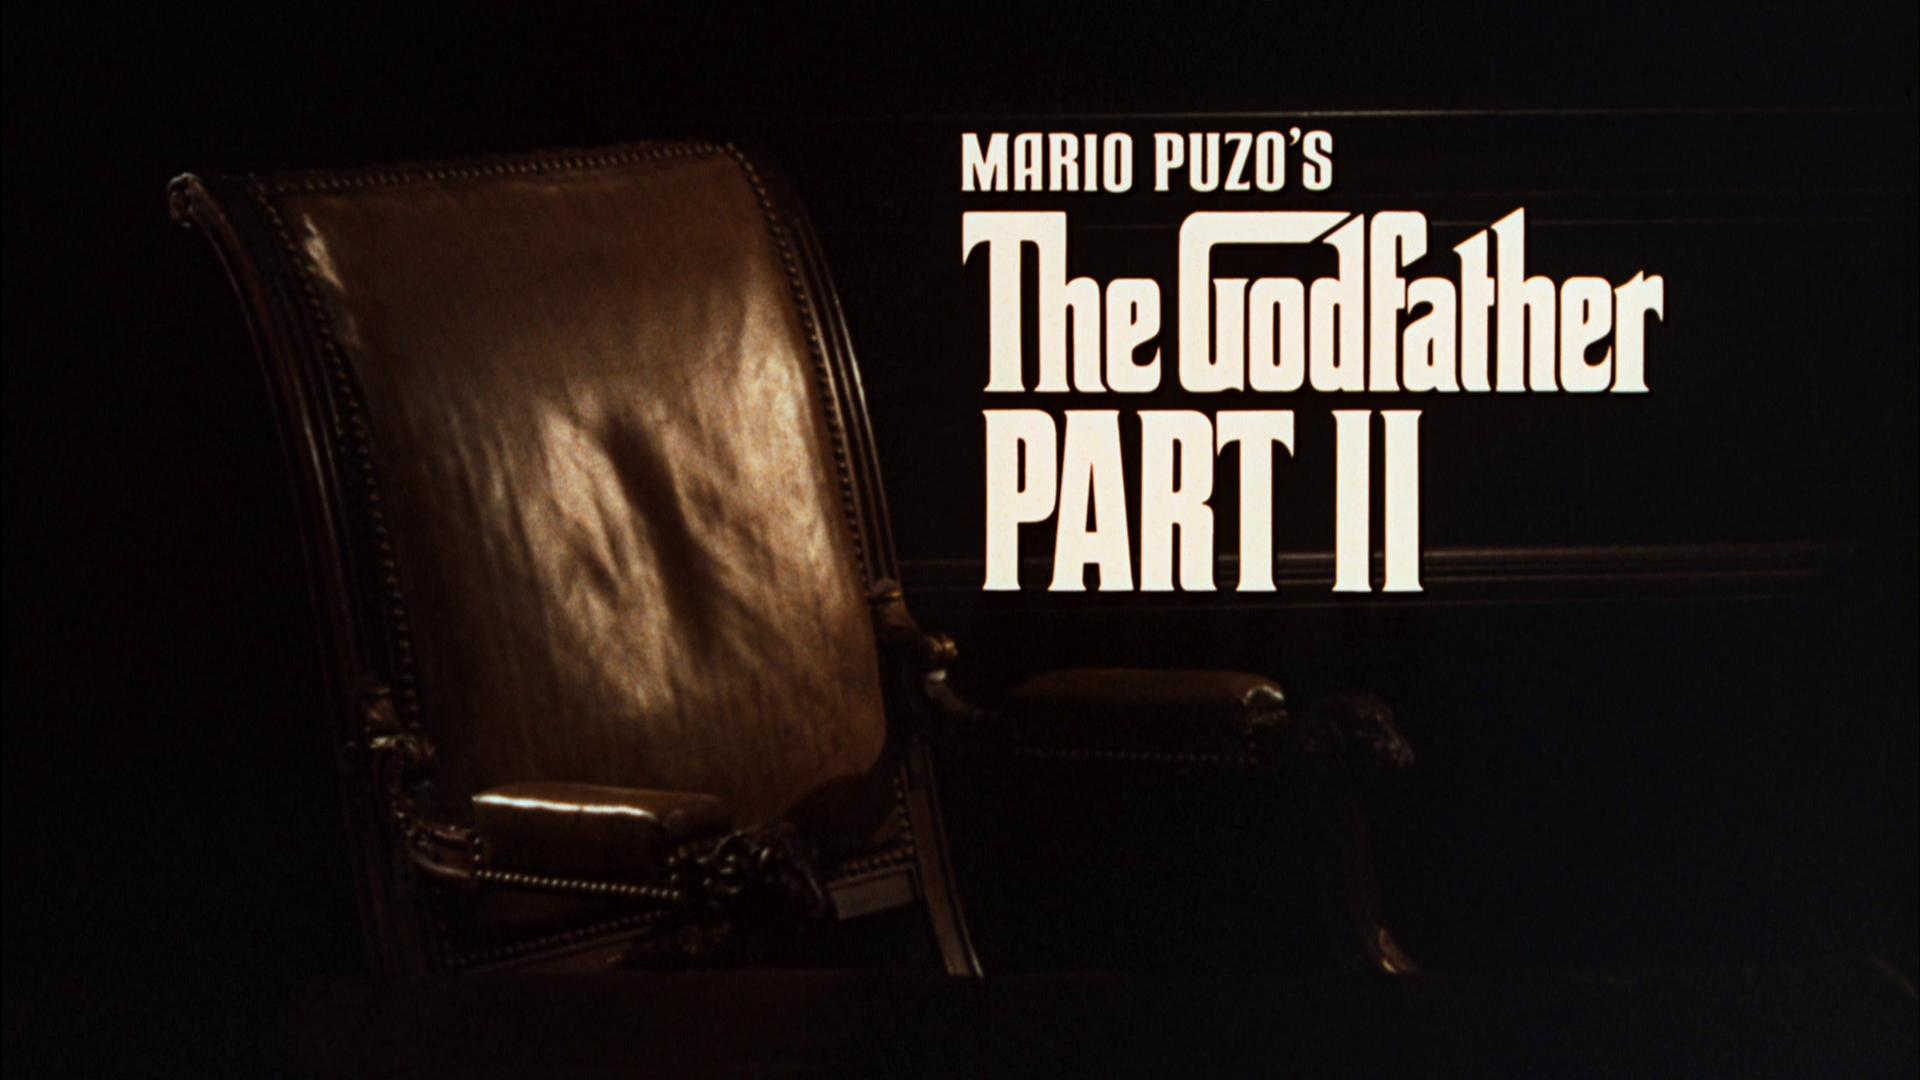 The Godfather: Part II #8